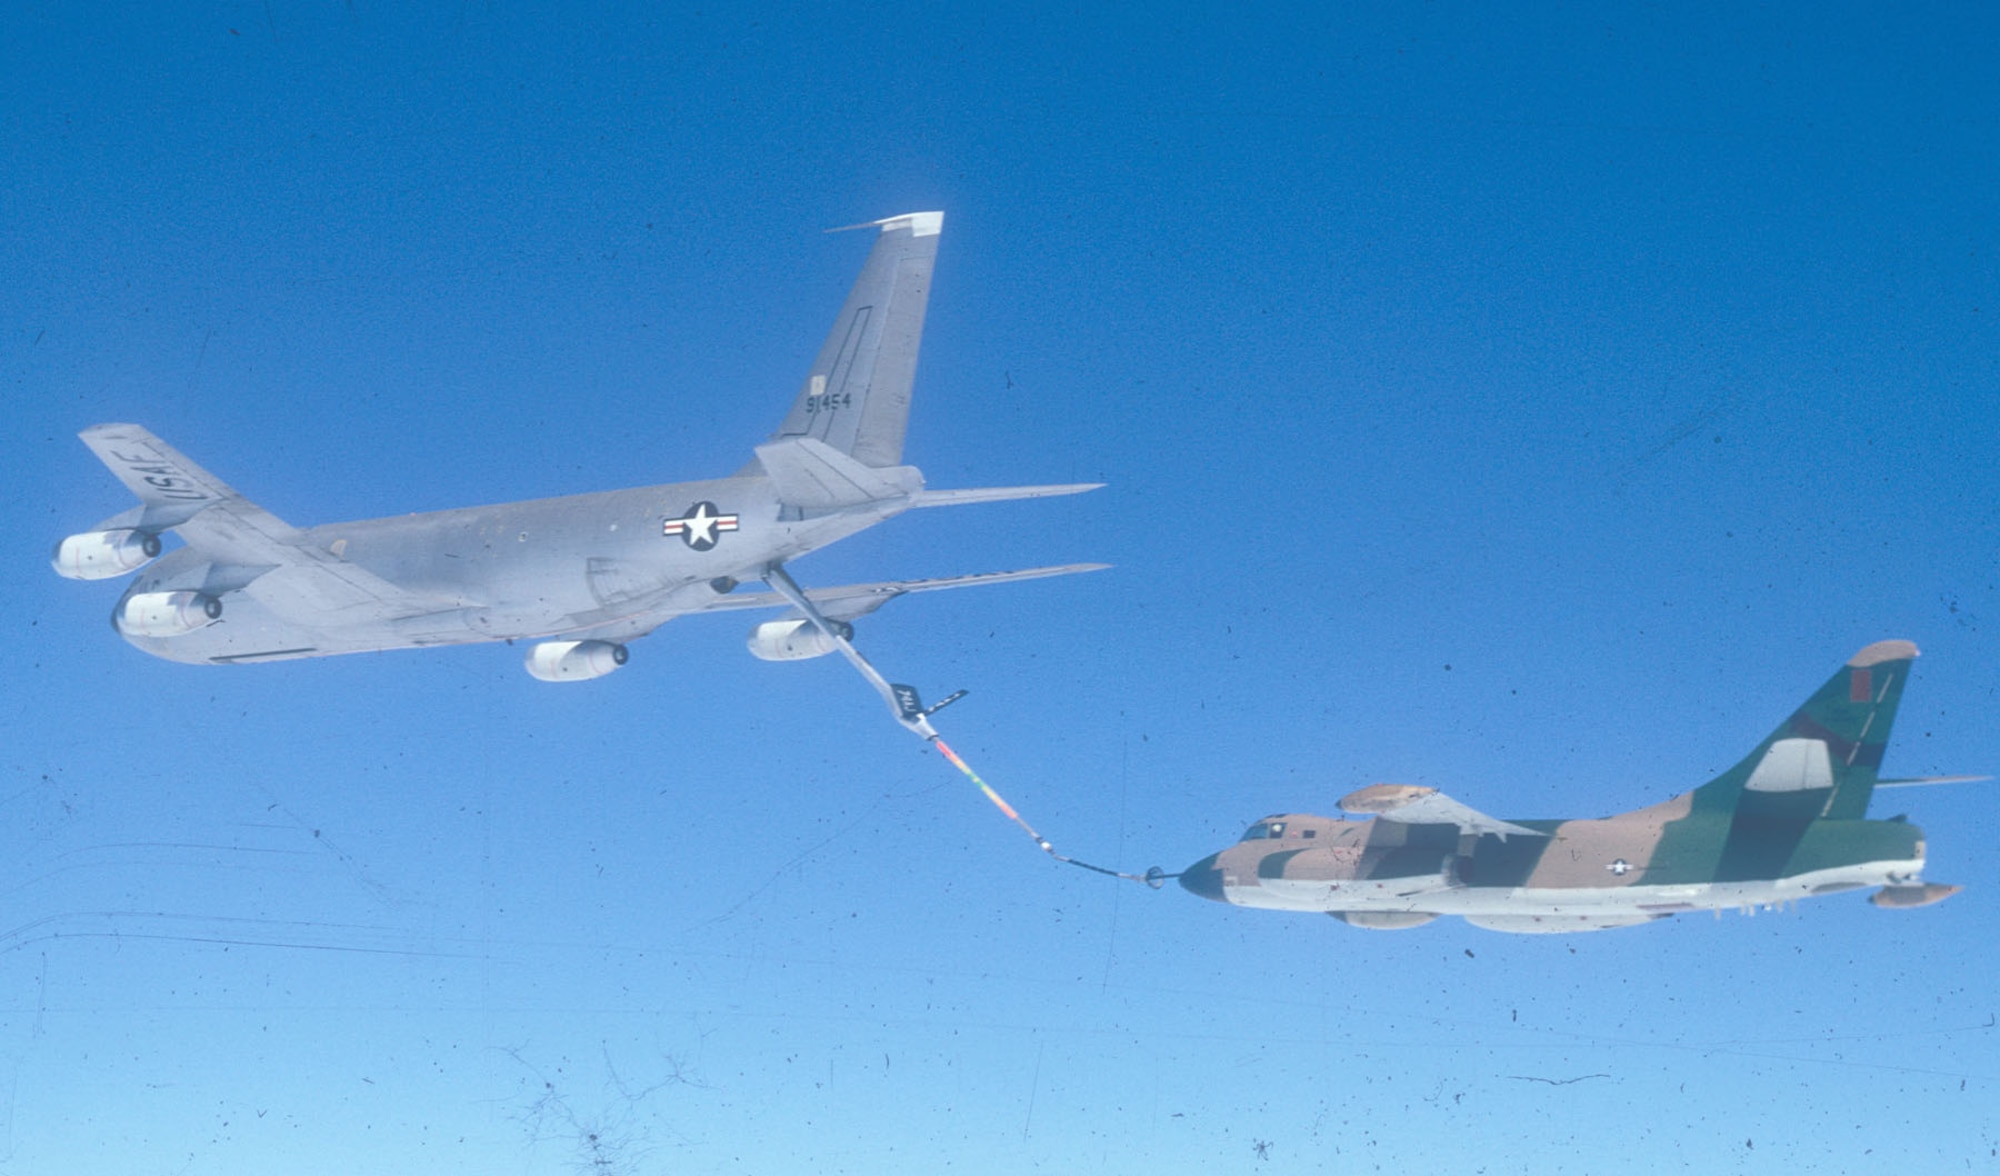 EB-66 being refueled in mid-air. The short probe on the EB-66’s nose fit into the KC-135’s hose basket. (U.S. Air Force photo)